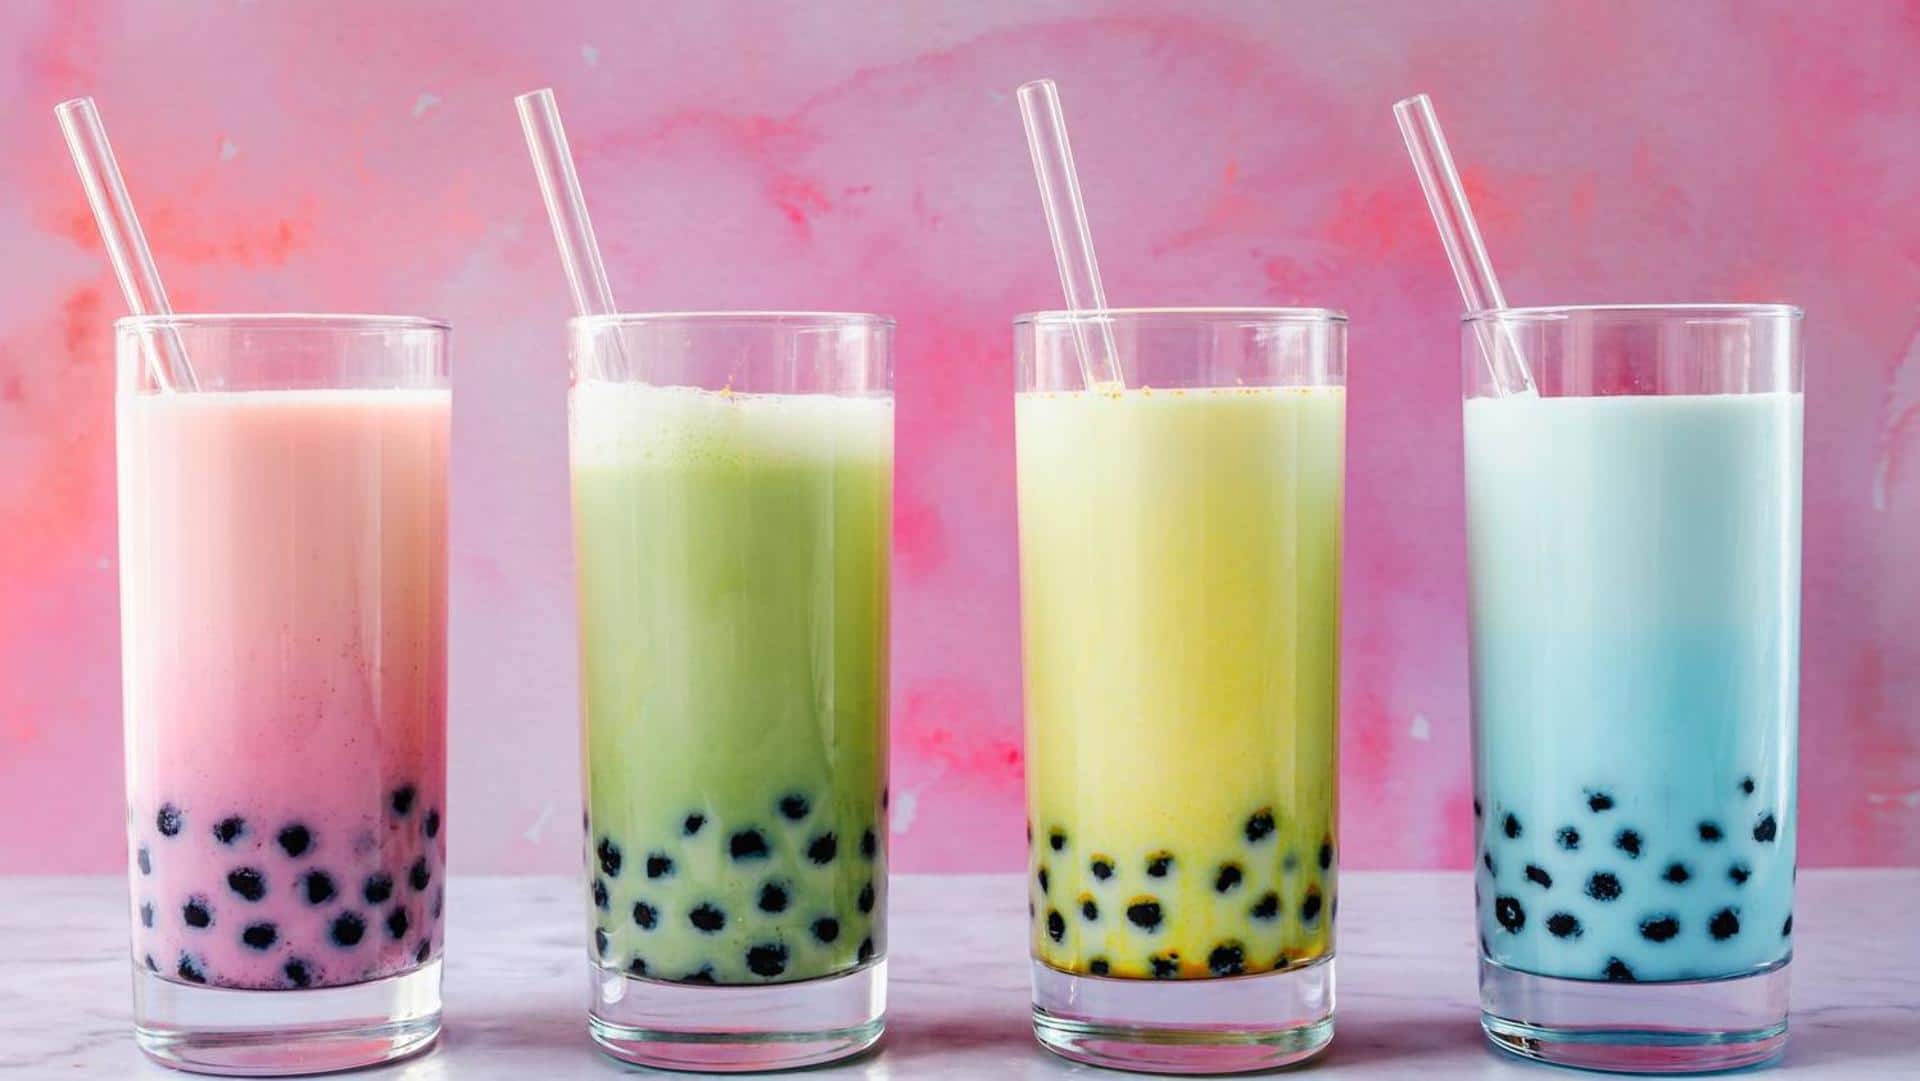 Here's how you can make boba tea at home